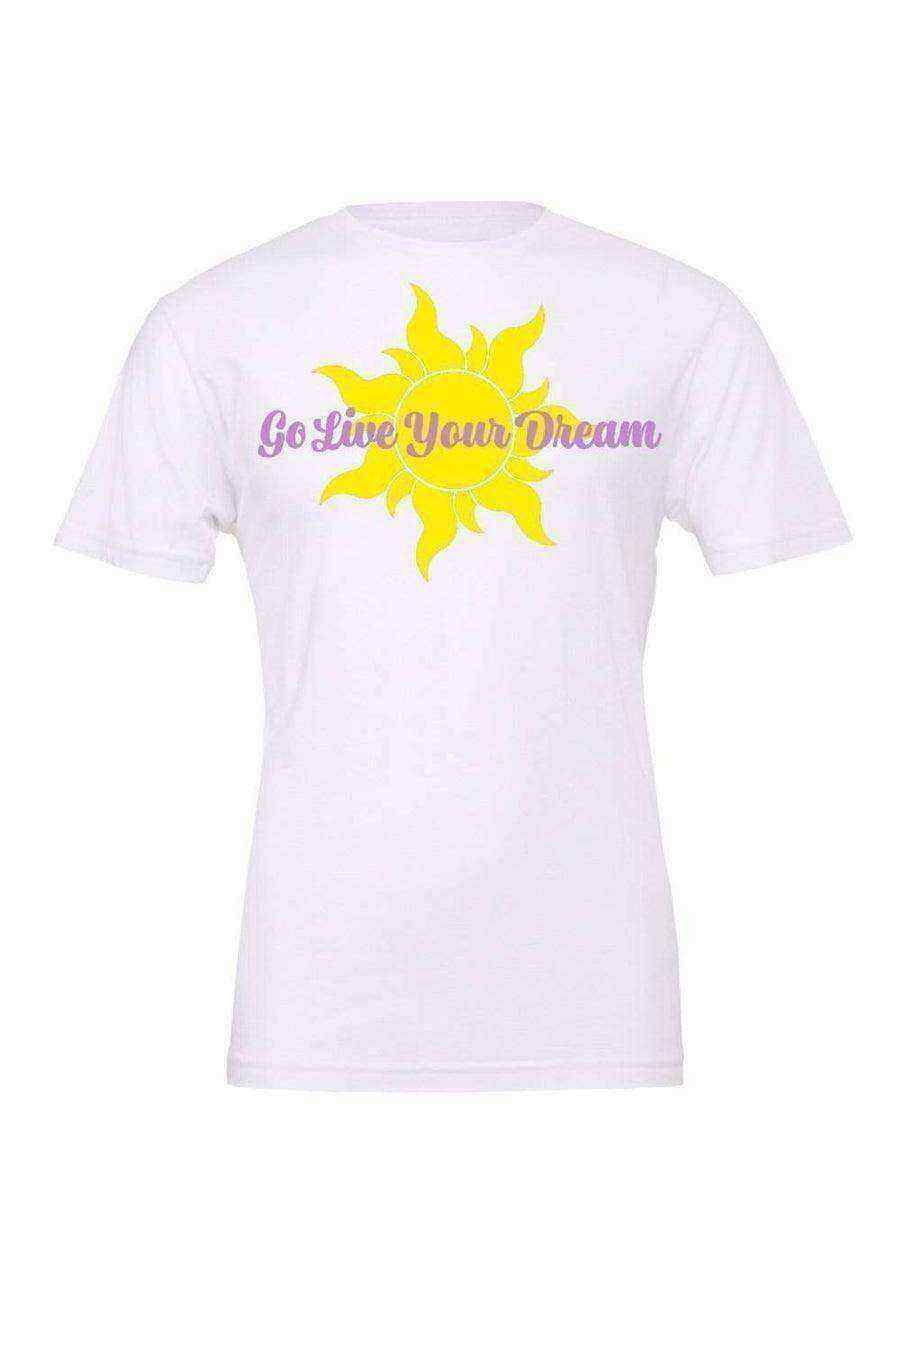 Go Live Your Dream - Dylan's Tees